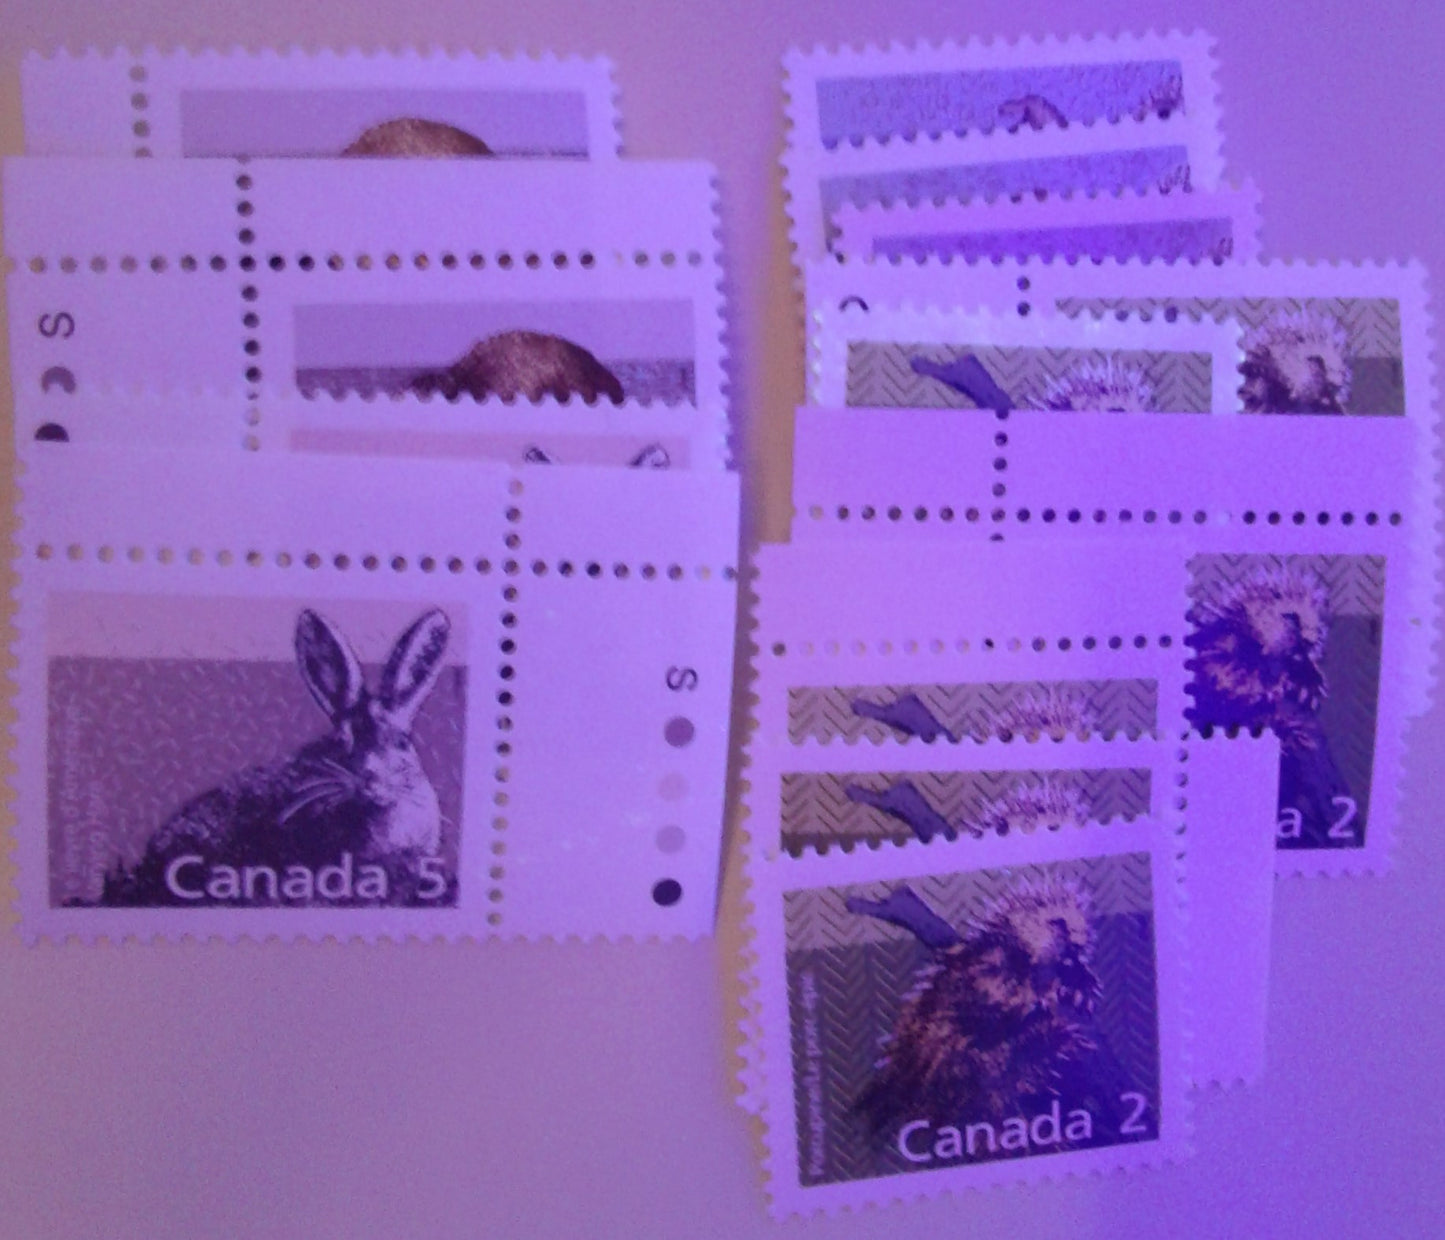 Canada #1180c 80c Multicolored Peary Caribou 1988-1991 Wildlife and Architecture Issue, VFNH UL Field Stock Block on Unlisted DF/LF Peterborough Paper